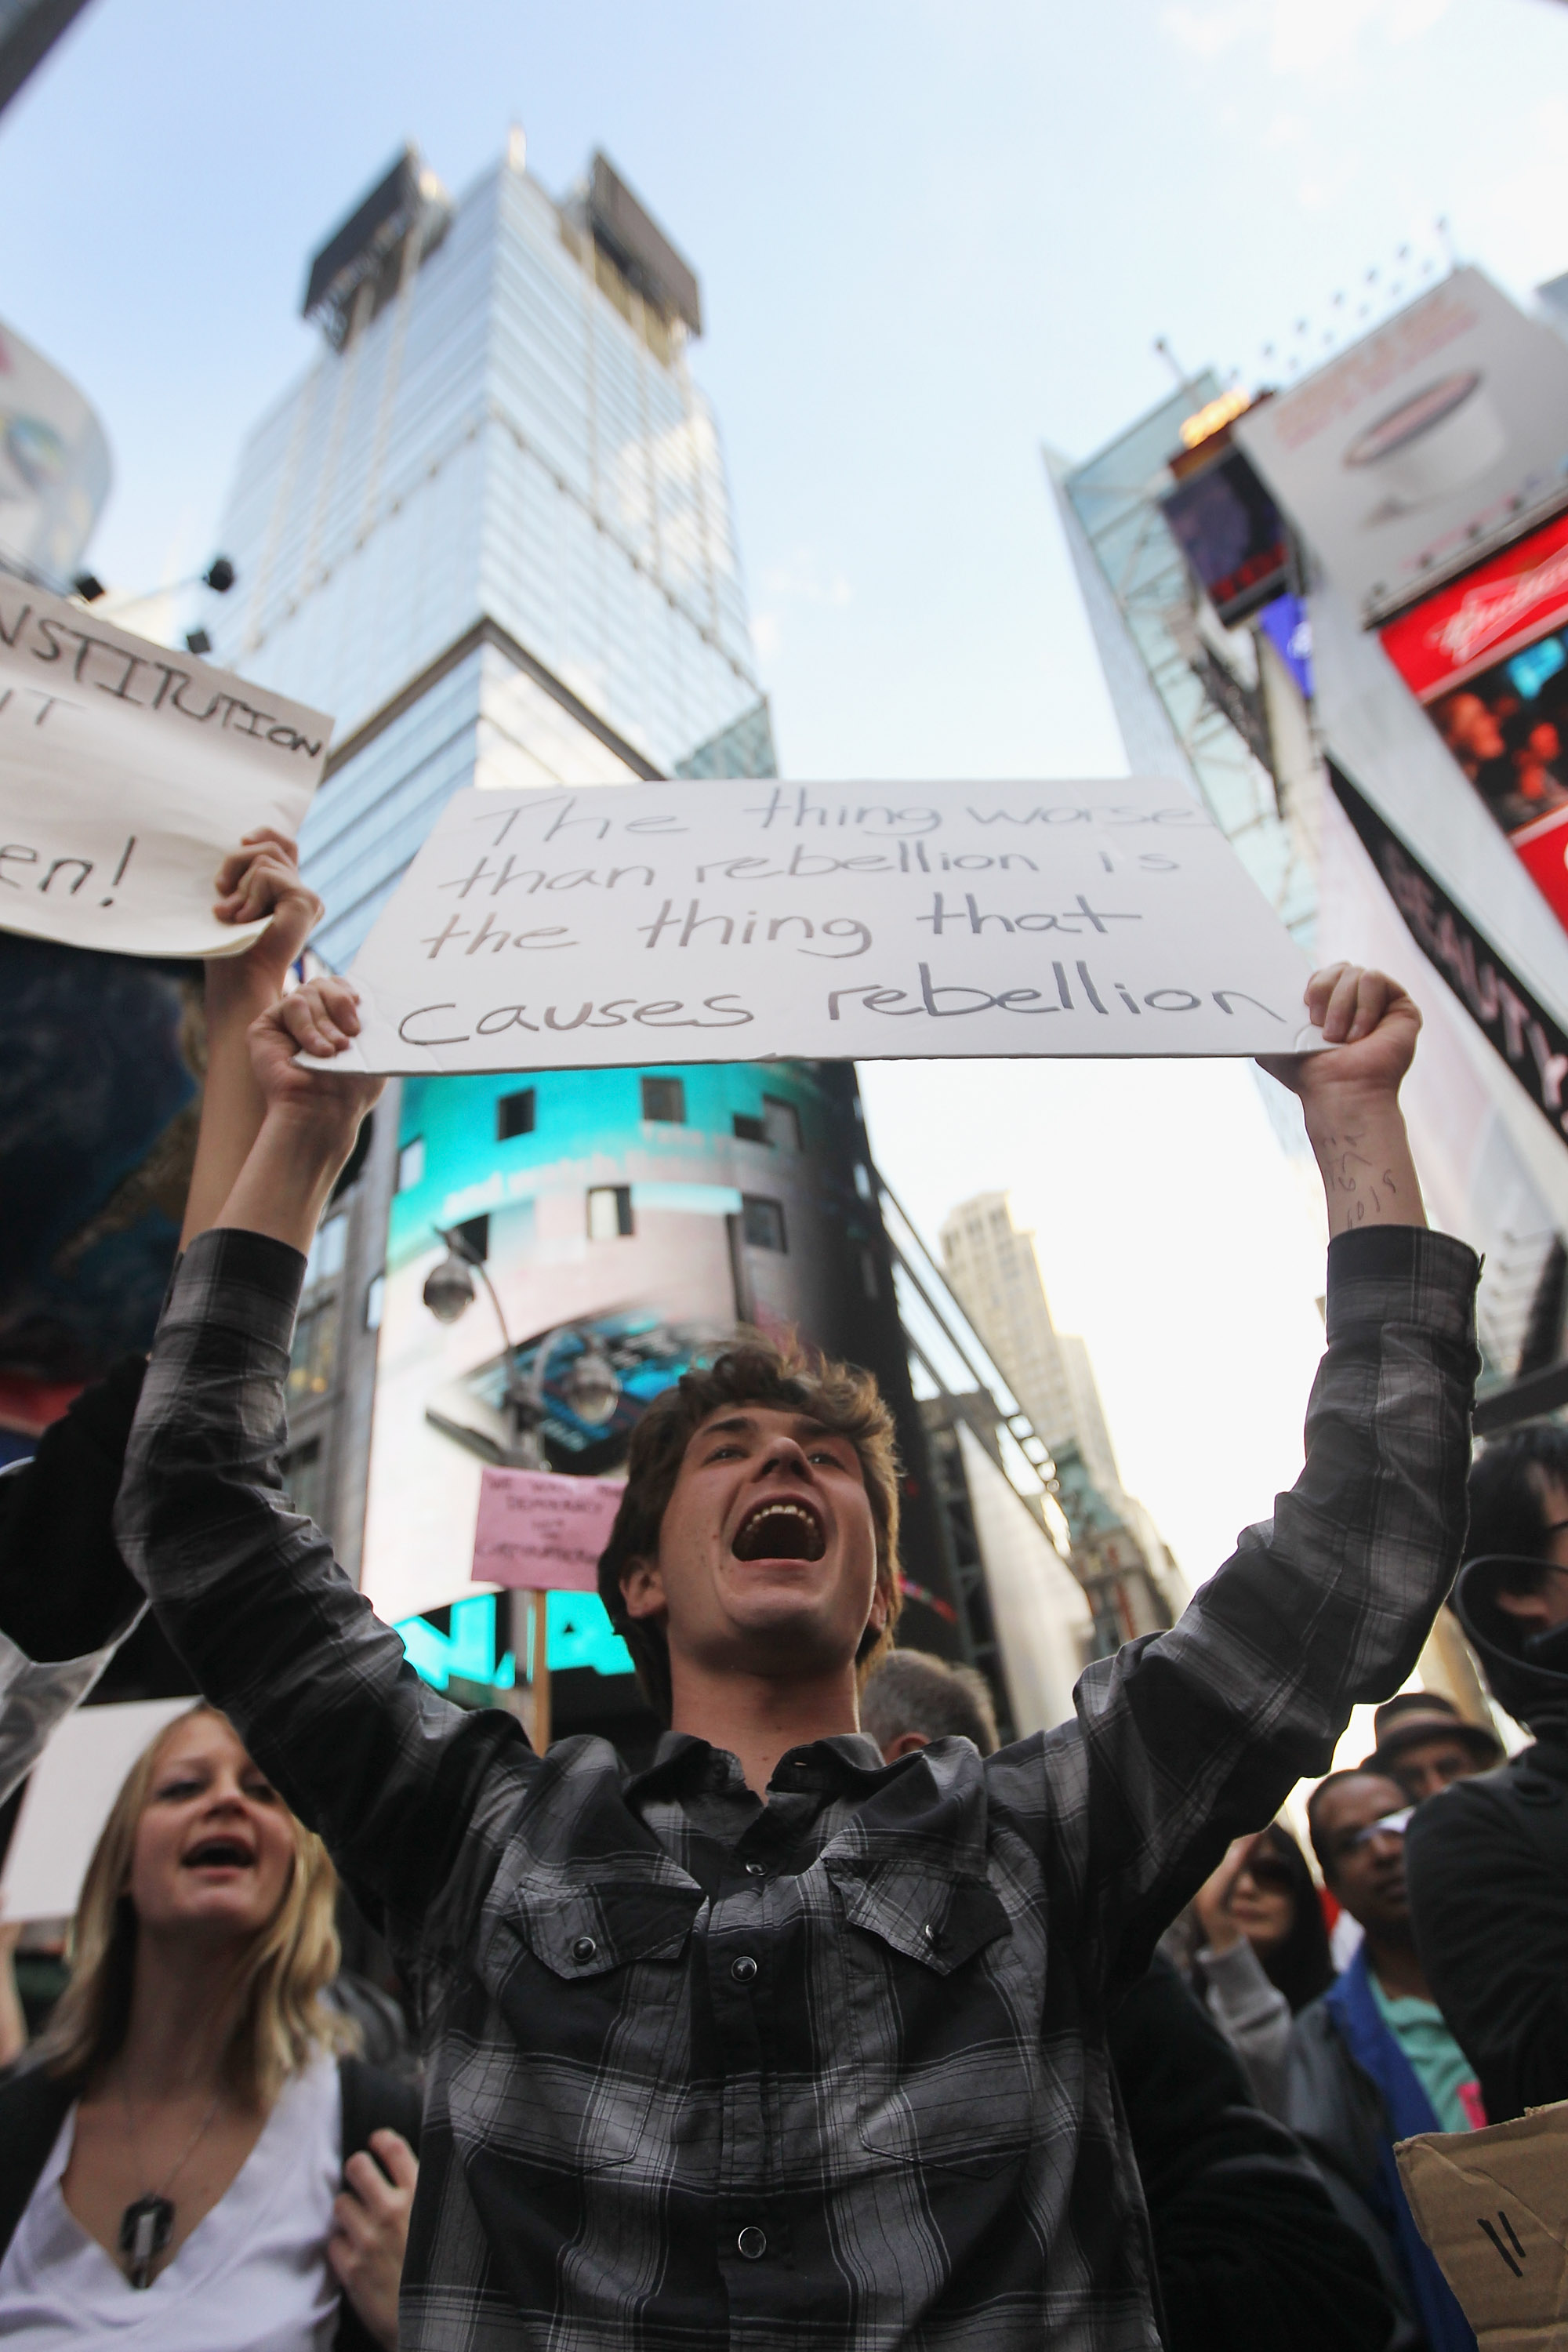 occupy-wall-street-in-times-square-10-15-114.jpg 